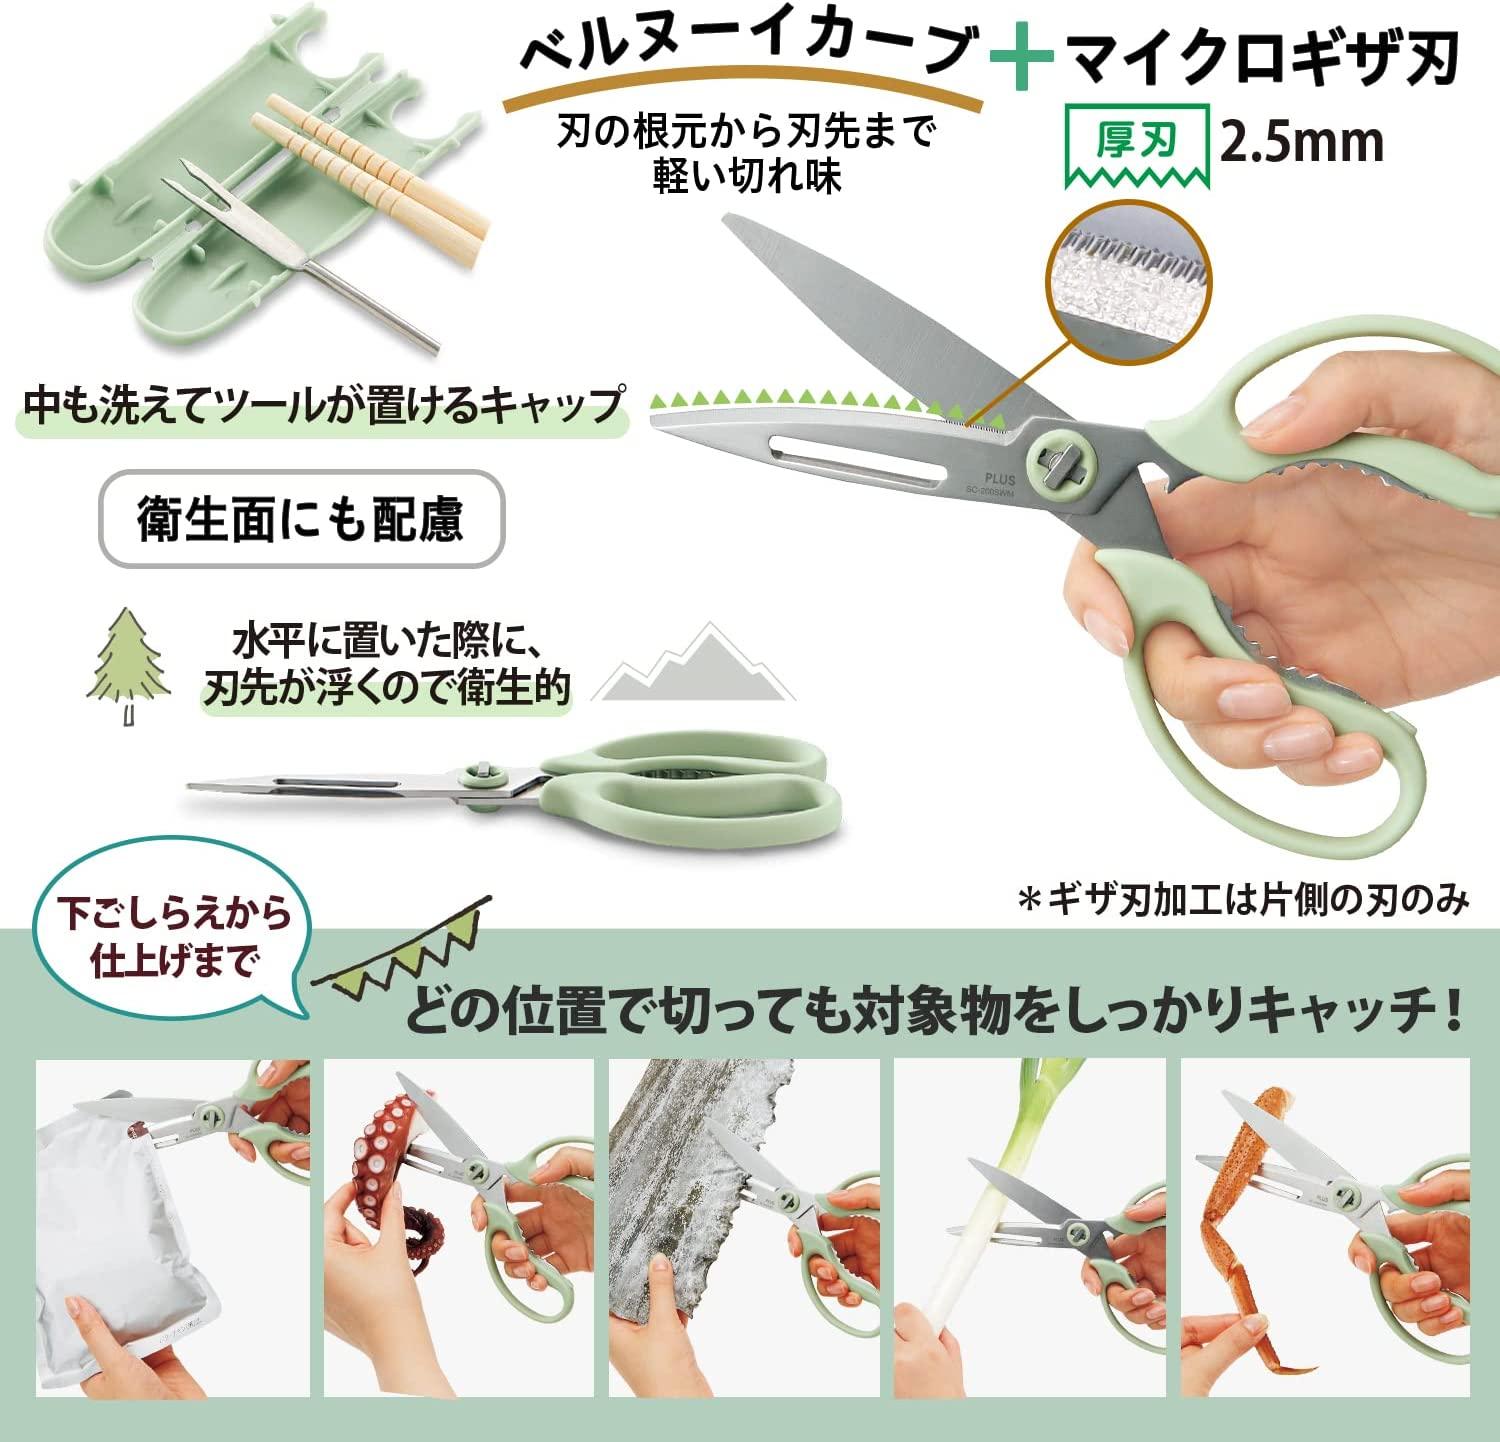 Plus Fit Cut Curve Cooking Scissors - Easy to Use